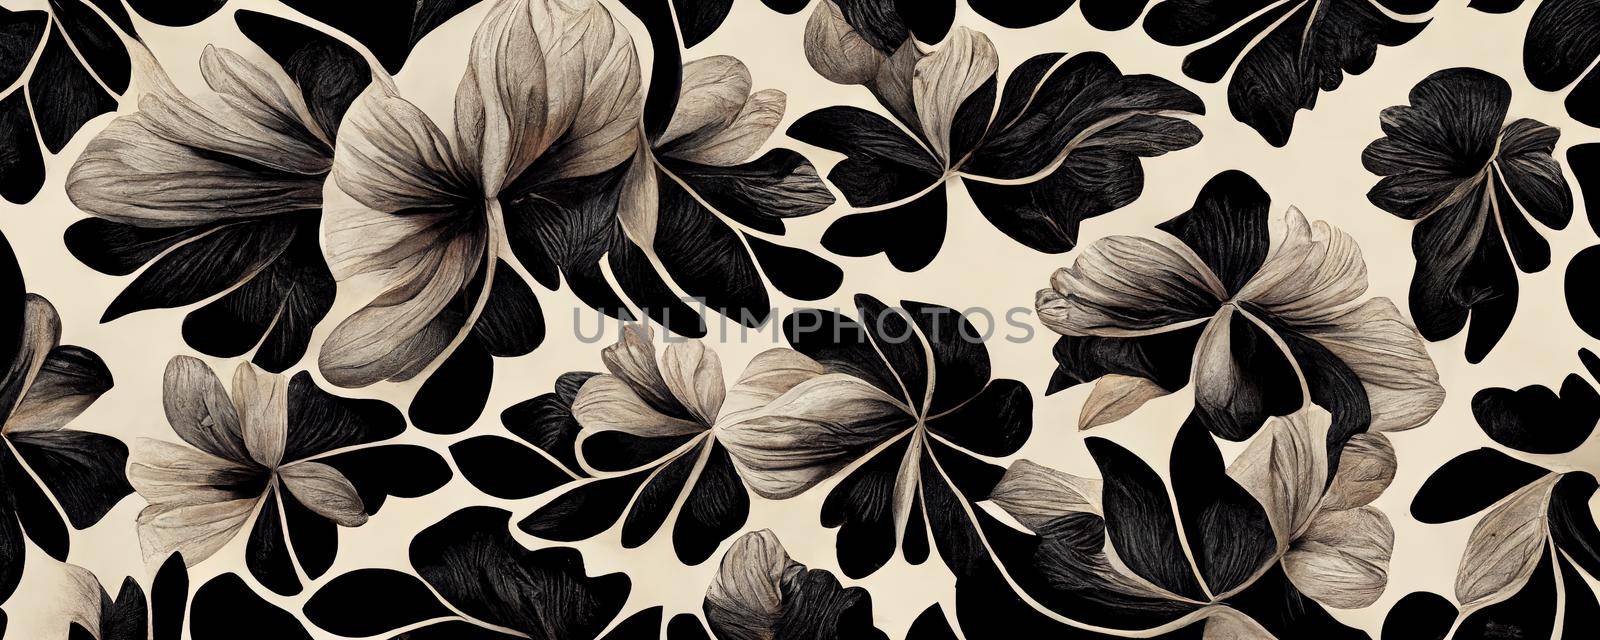 abstract flower illustration, creative flower background by TRMK